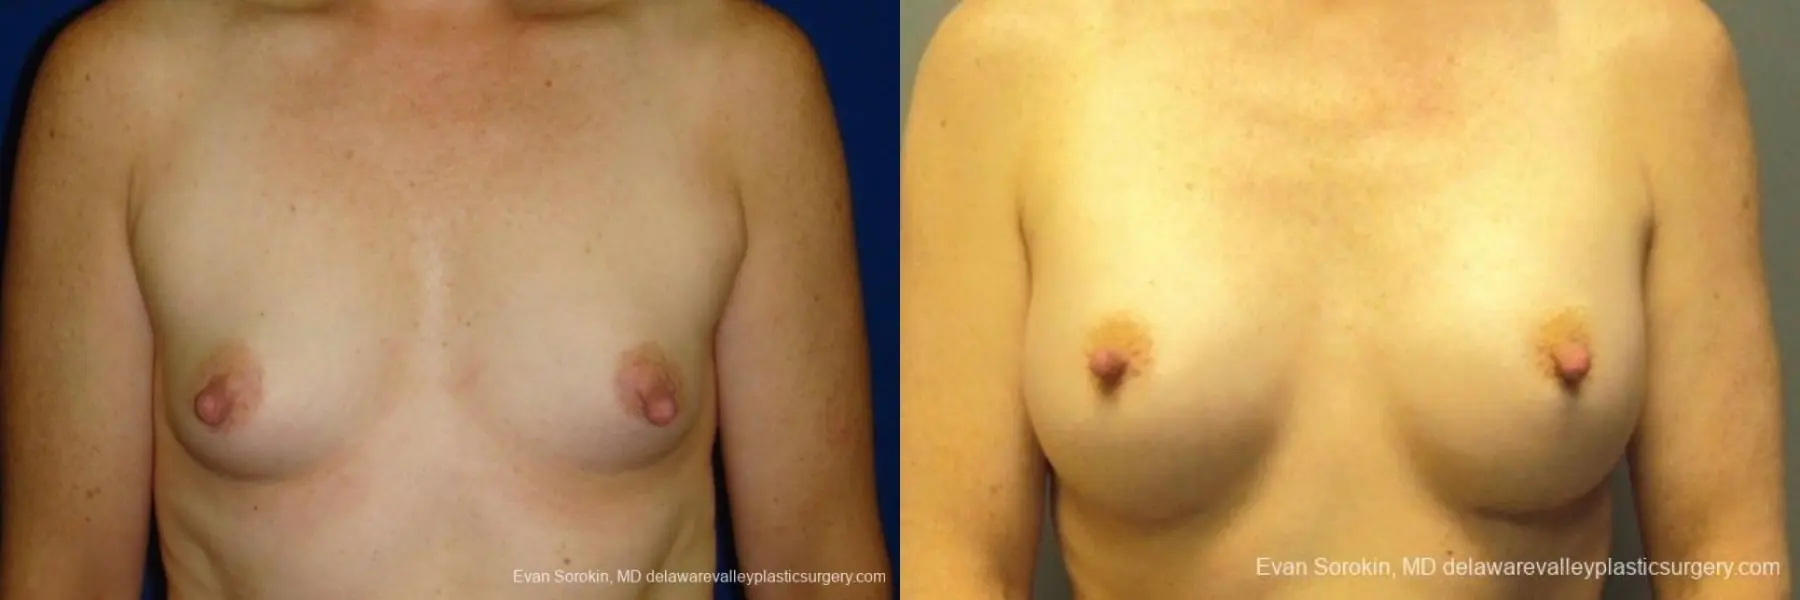 Philadelphia Breast Augmentation 8765 - Before and After 1